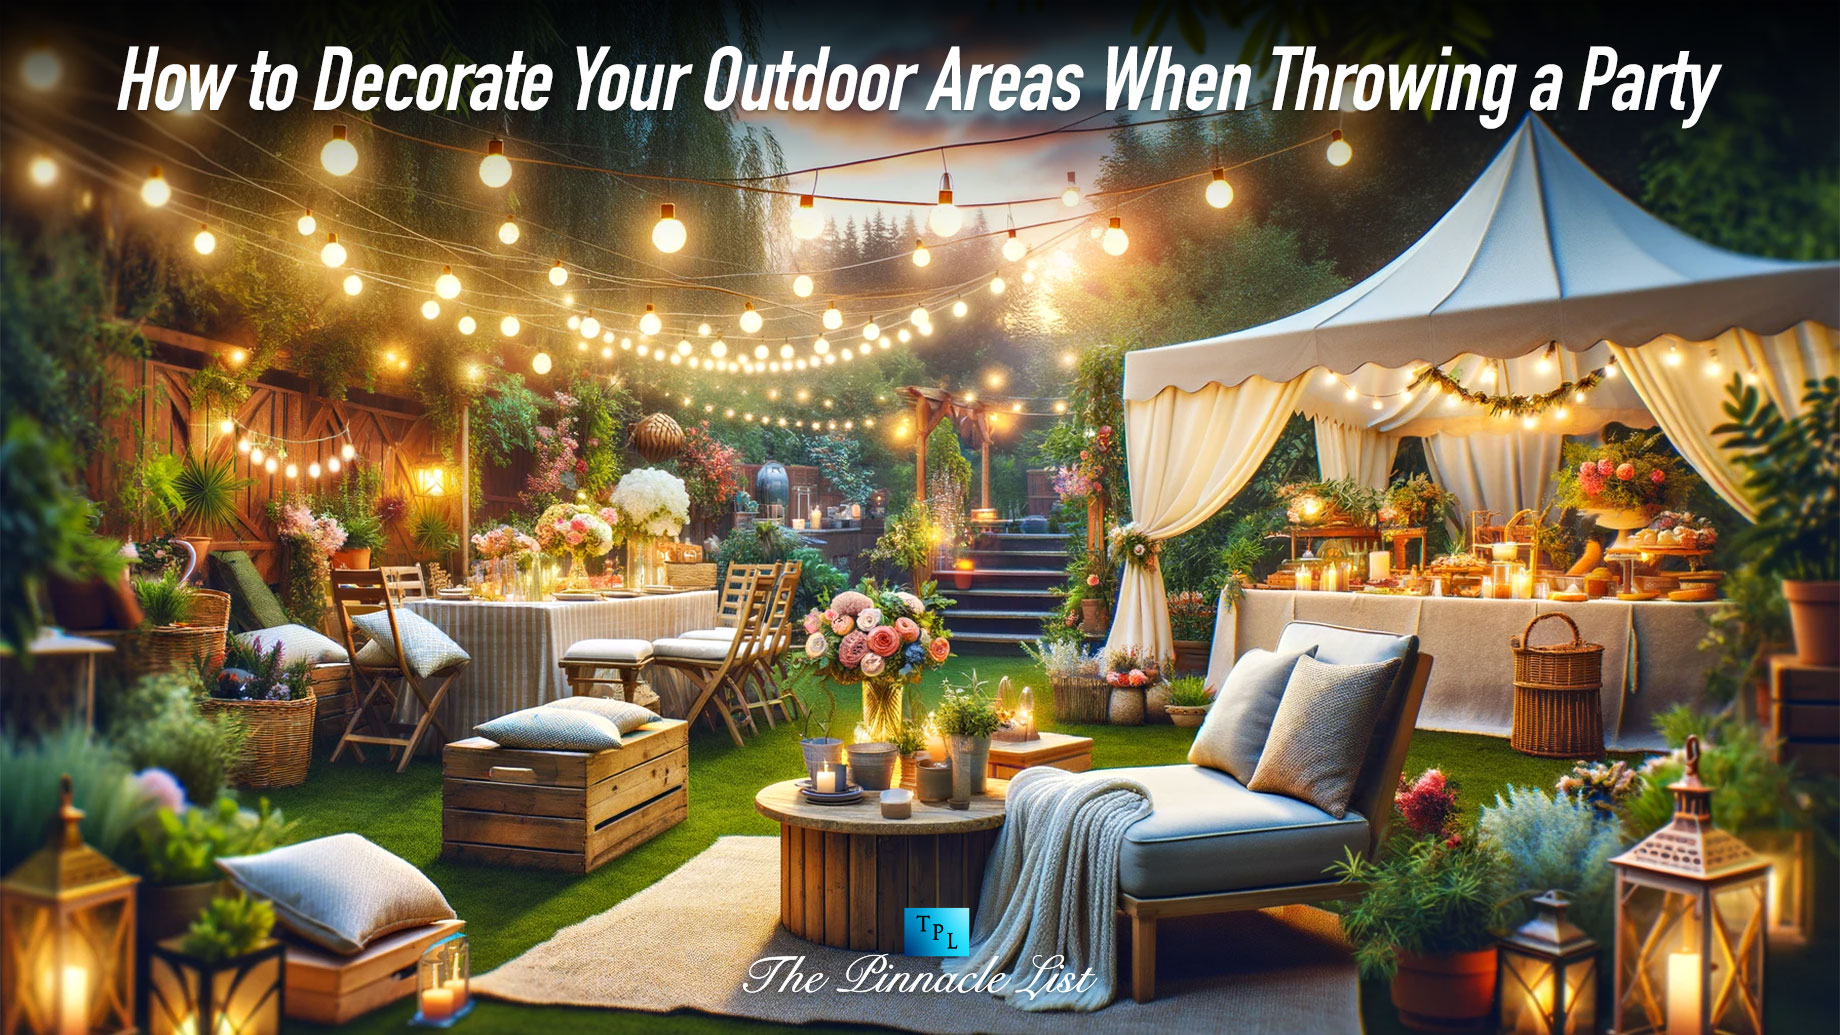 How to Decorate Your Outdoor Areas When Throwing a Party